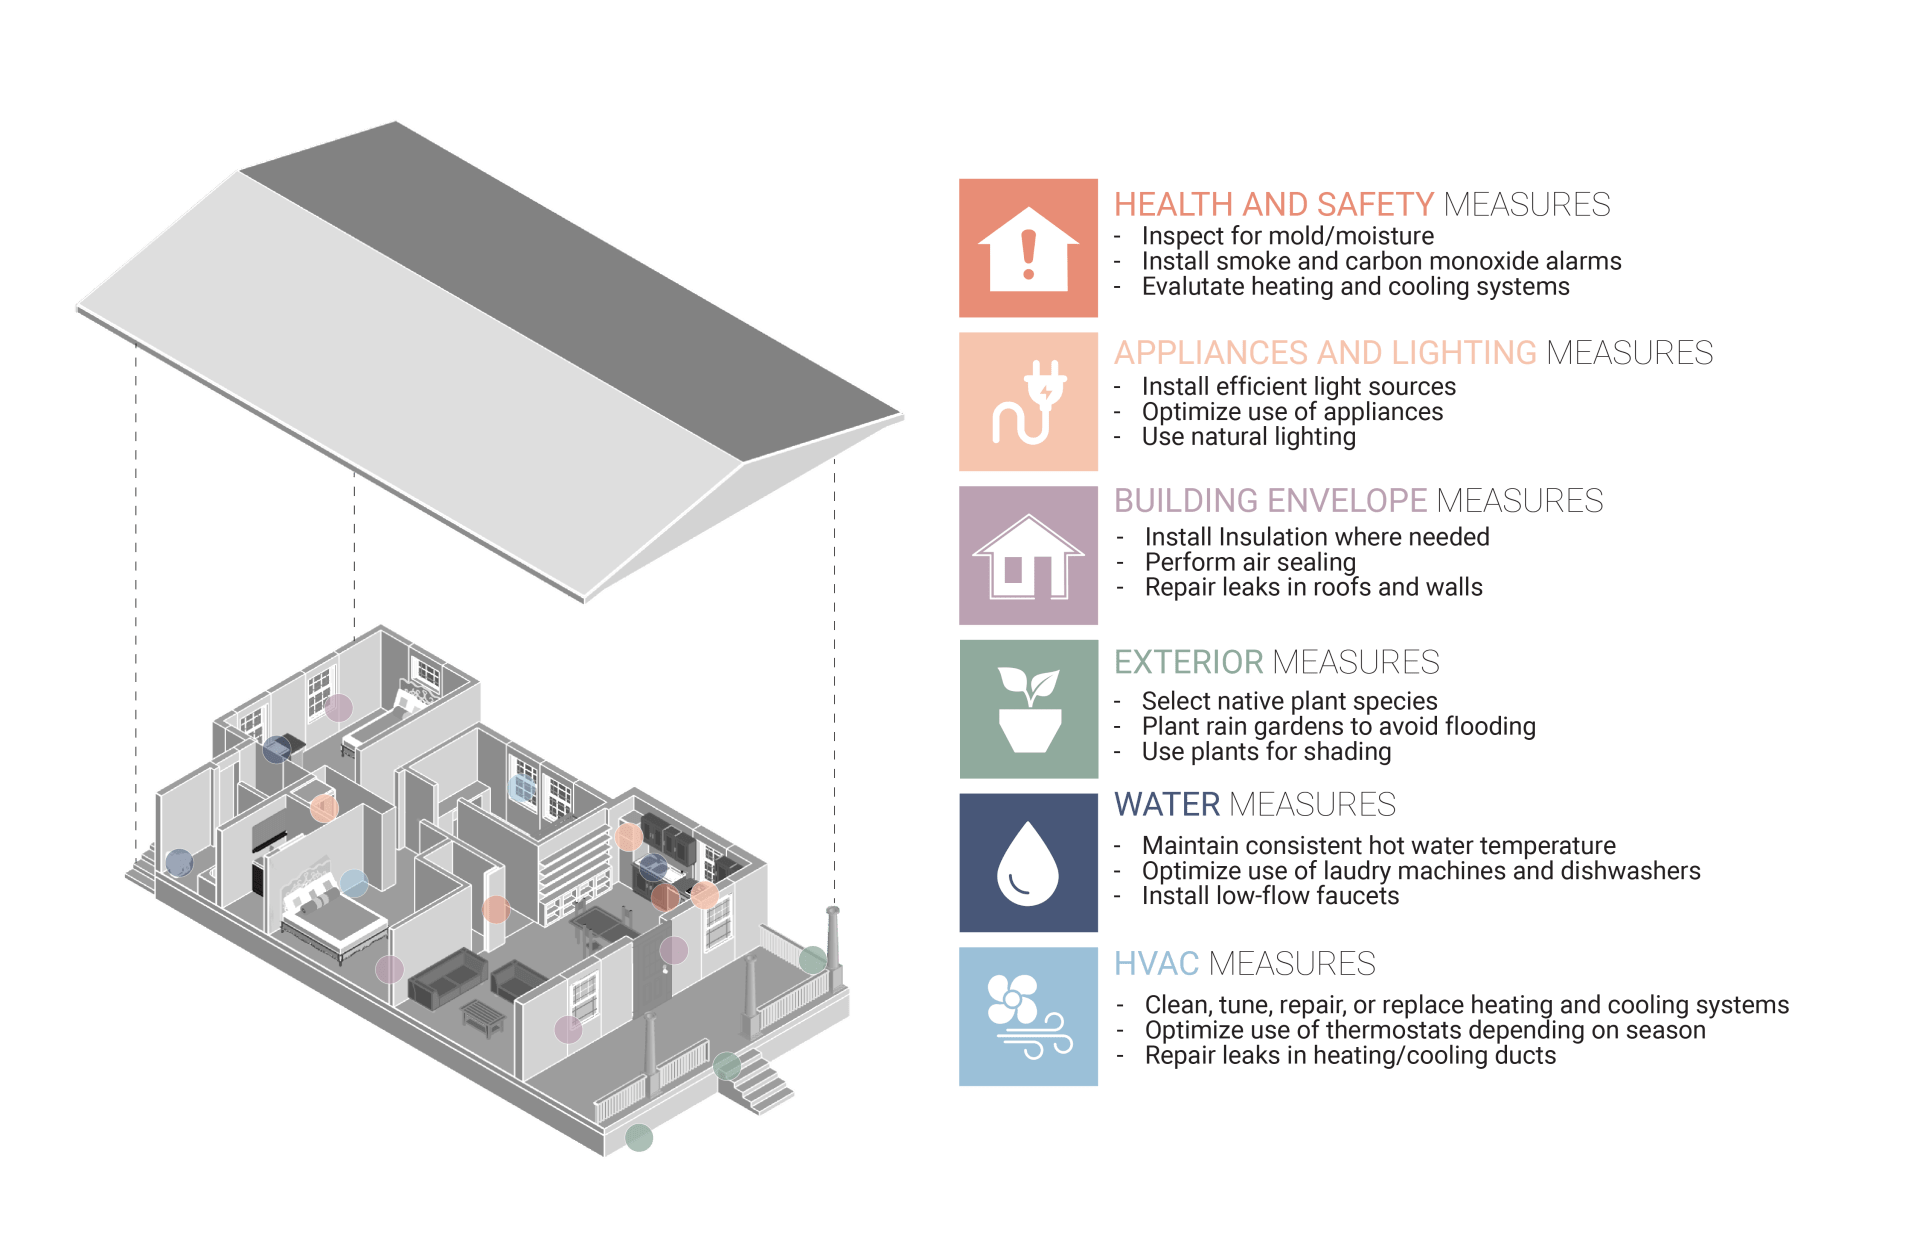 Isometric drawing of a single-family home. Accompanying text highlights different categories of home improvements. Health and safety measures include inspecting for mold or moisture, installing smoke and carbon monoxide alarms, and evaluating heating and cooling systems. Appliance and lighting measures include installing efficient light sources, optimizing appliance use, and using natural lighting. Building envelope measures include installing insulation, air sealing, and repairing leaks. Exterior measures include selecting native plant species, planting rain gardens, and using plants for shading. Water measures include maintaining consistent hot water temperature, optimizing appliance use, and installing low-flow faucets. HVAC measures include maintaining heating and cooling systems, optimizing use of thermostats, and repairing duct leaks.